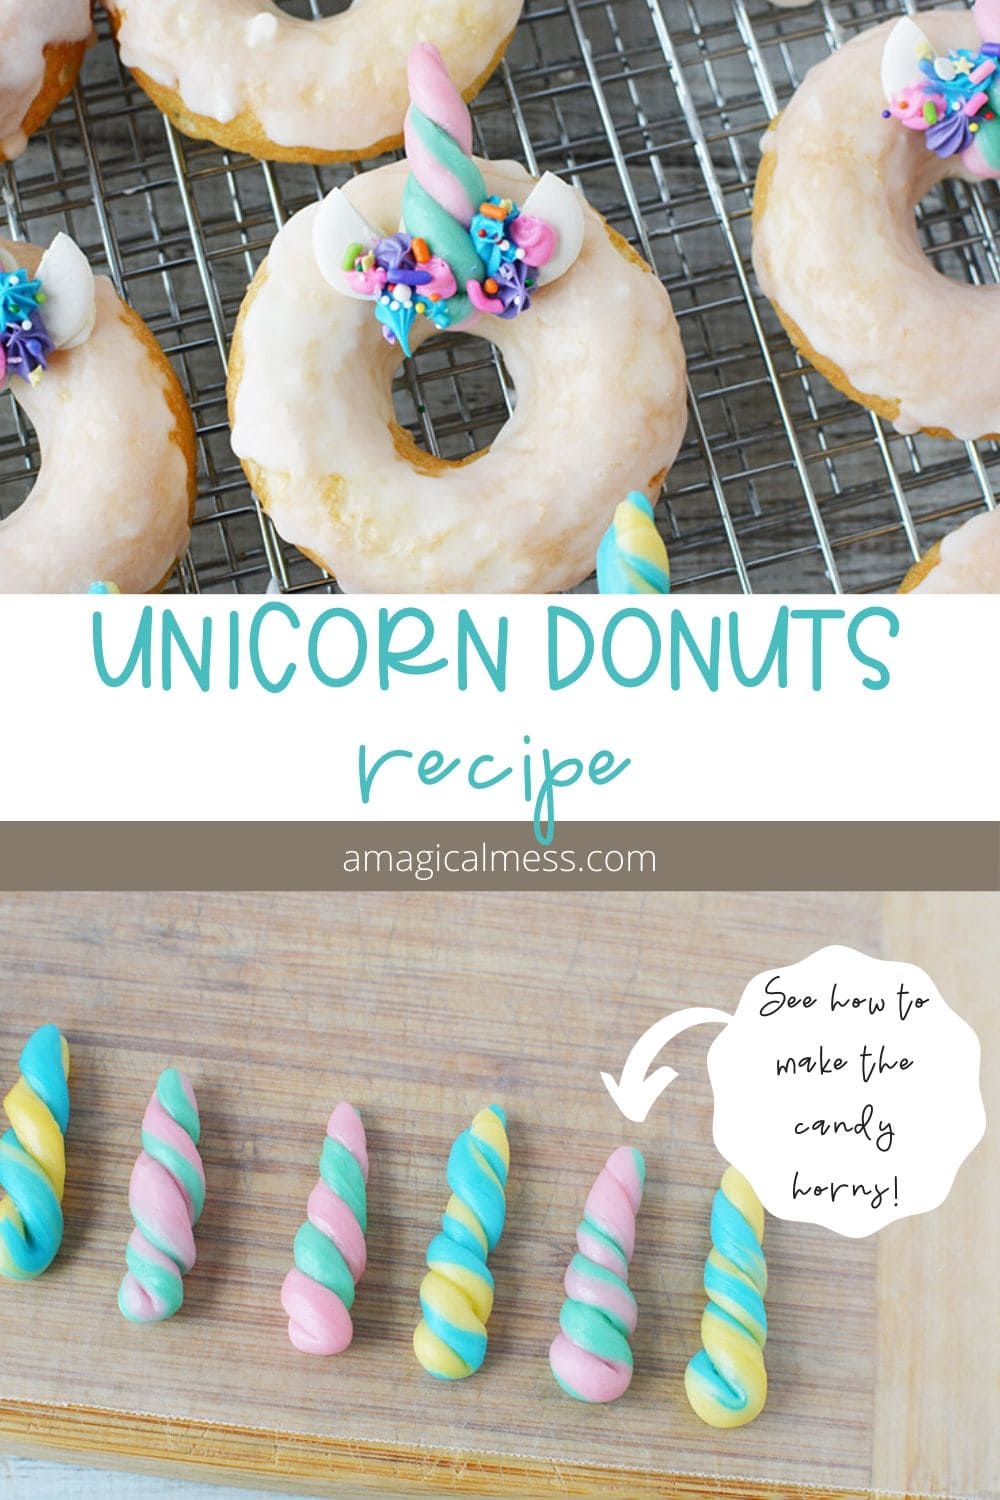 Donuts with unicorn horns.